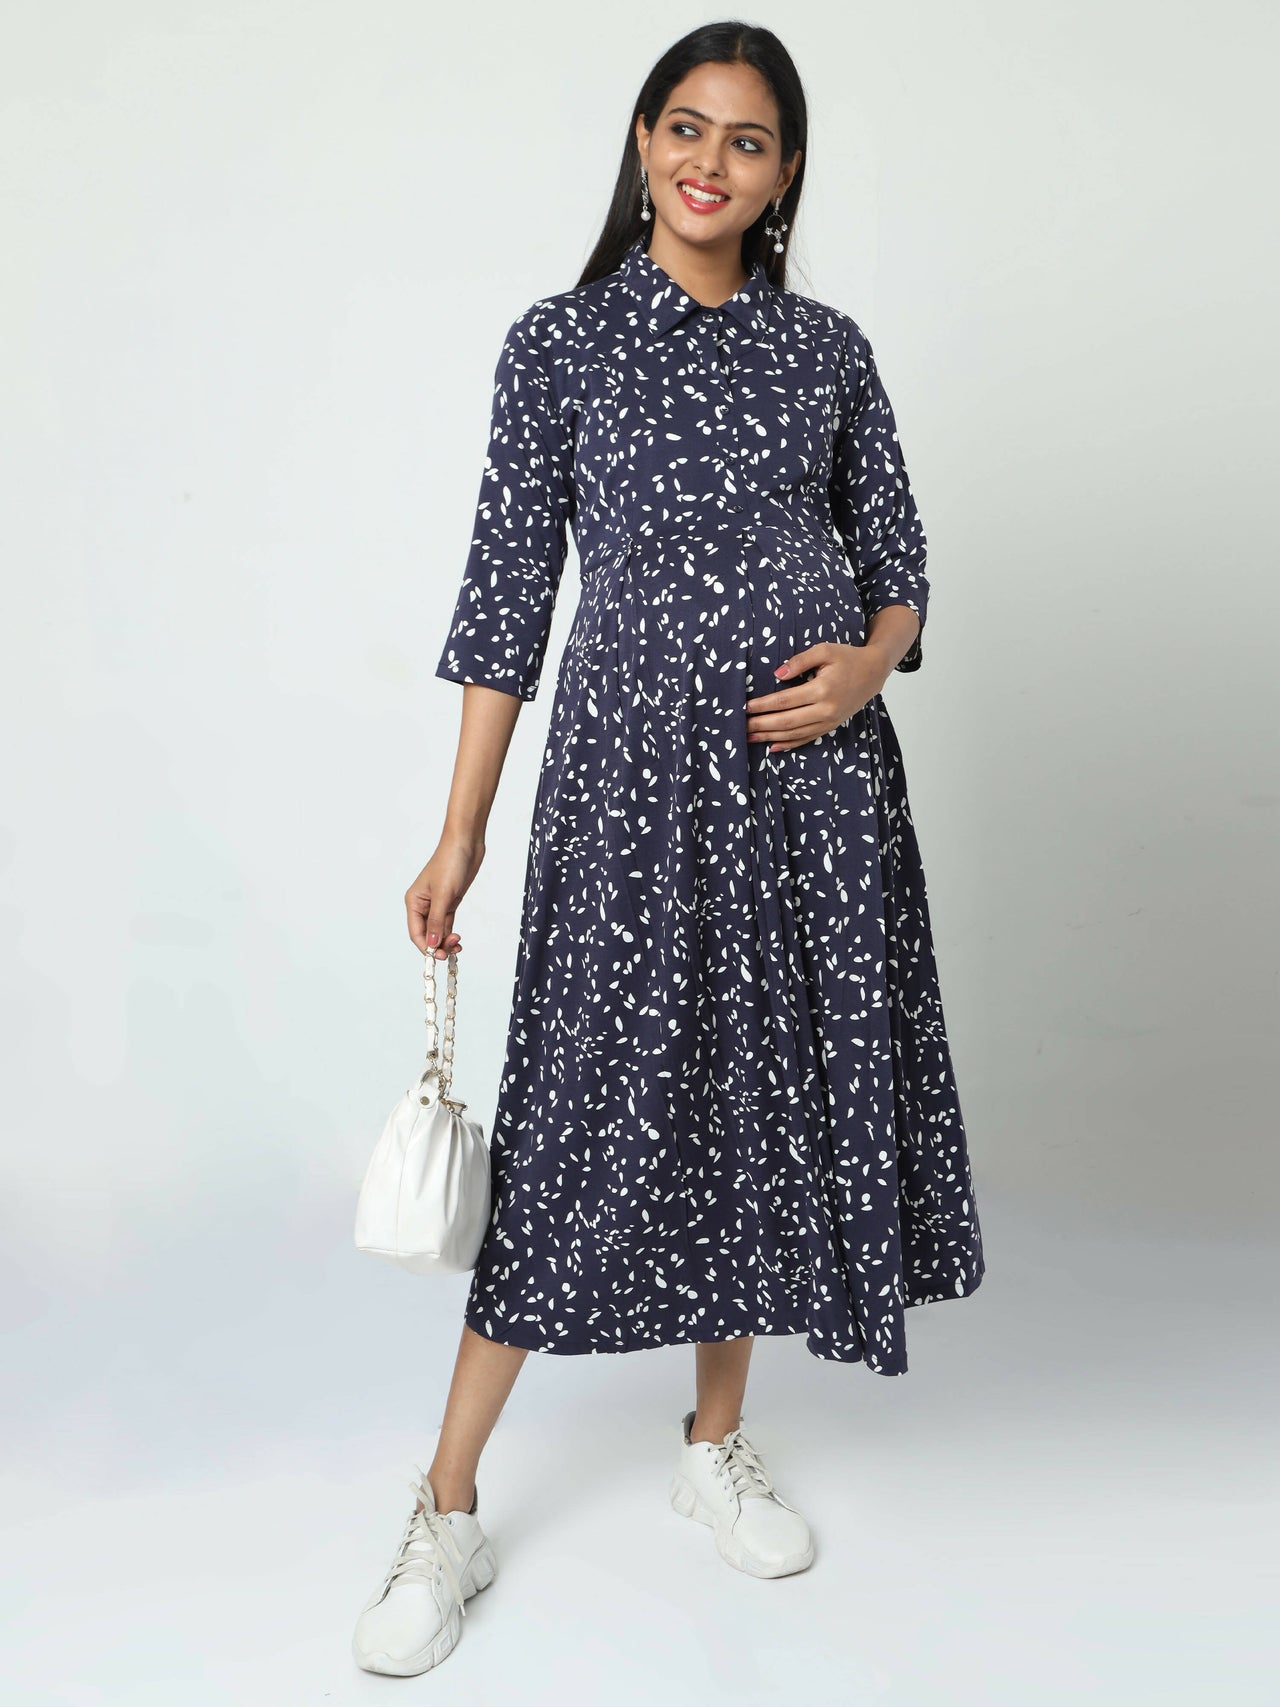 Manet Three Fourth Maternity Dress White Dot Print With Concealed Zipper Nursing Access - Navy Blue - Distacart